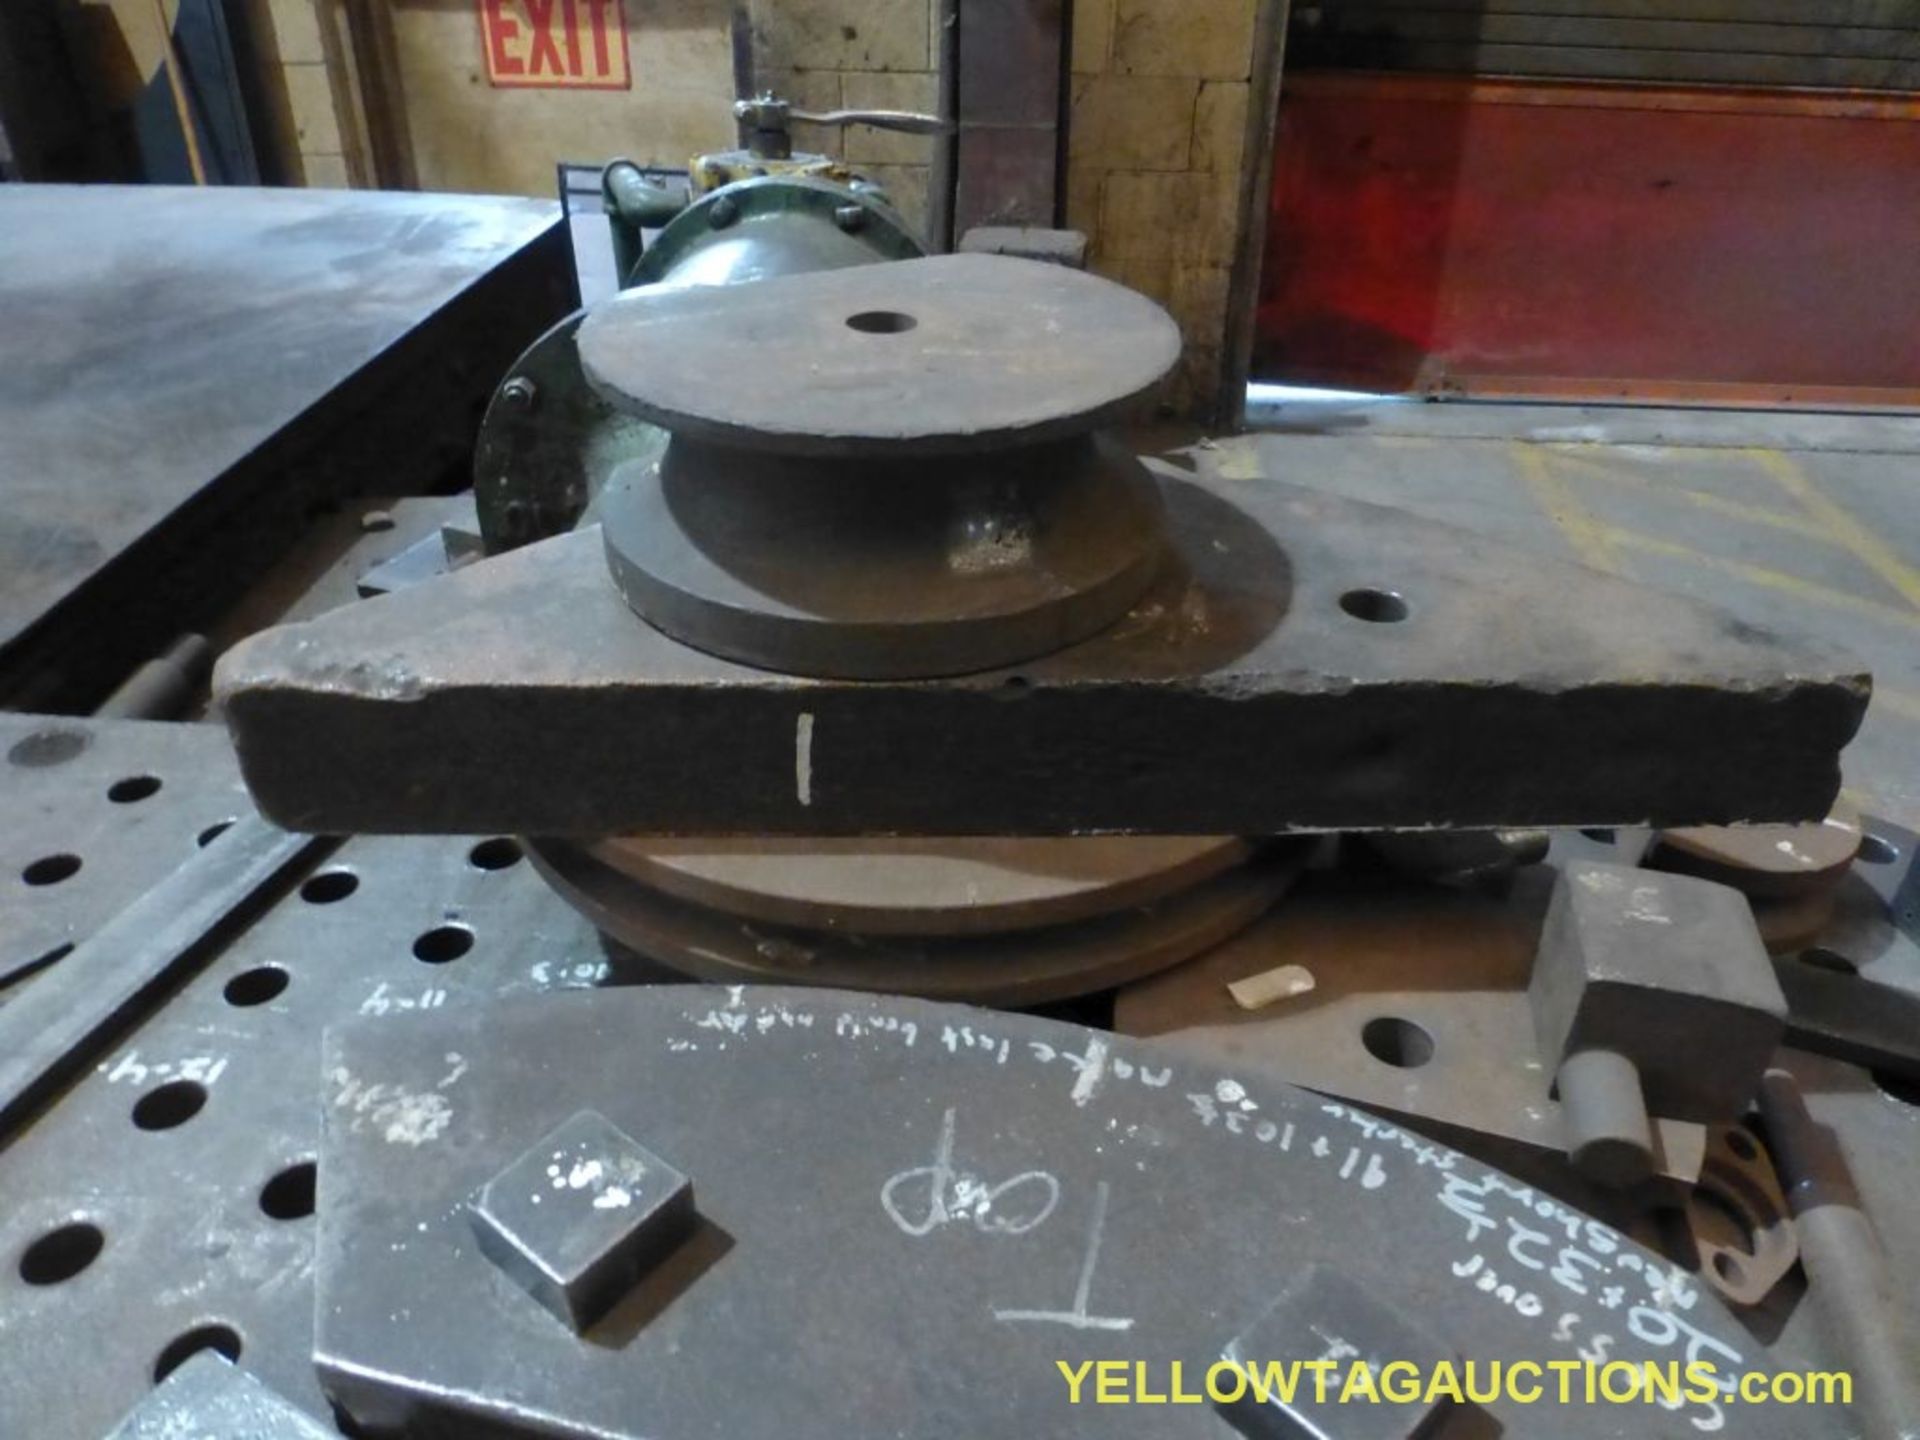 Metal Table w/Pipe Bender and Attached Lathe Machine - Image 8 of 10